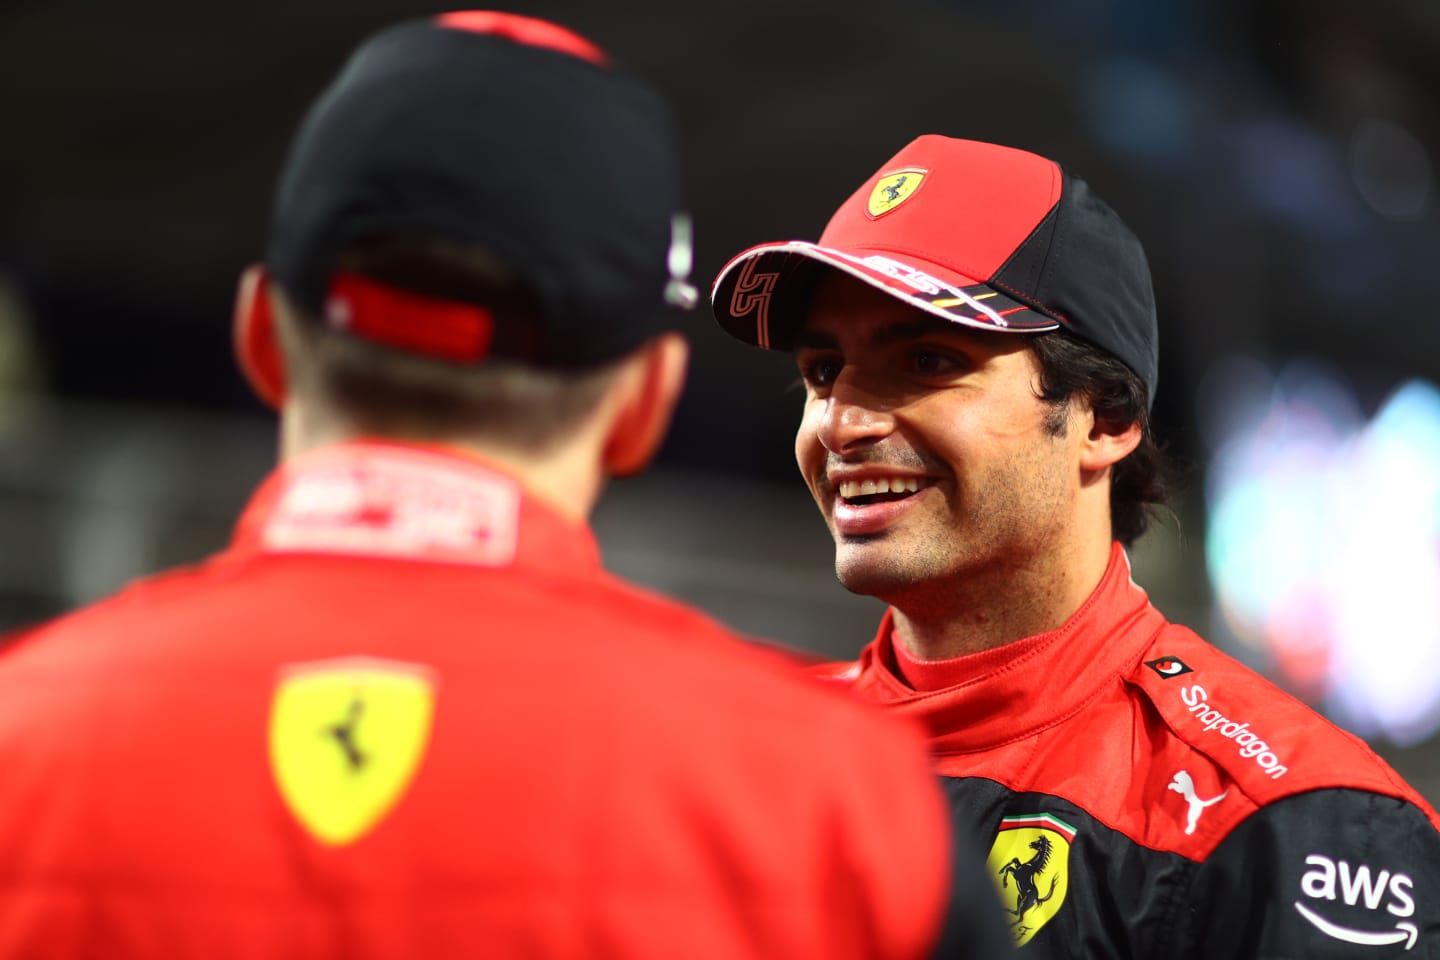 JEDDAH, SAUDI ARABIA - MARCH 26: Third placed qualifier Carlos Sainz of Spain and Ferrari talks with Second placed qualifier Charles Leclerc of Monaco and Ferrari in parc ferme during qualifying ahead of the F1 Grand Prix of Saudi Arabia at the Jeddah Corniche Circuit on March 26, 2022 in Jeddah, Saudi Arabia. (Photo by Dan Istitene - Formula 1/Formula 1 via Getty Images)